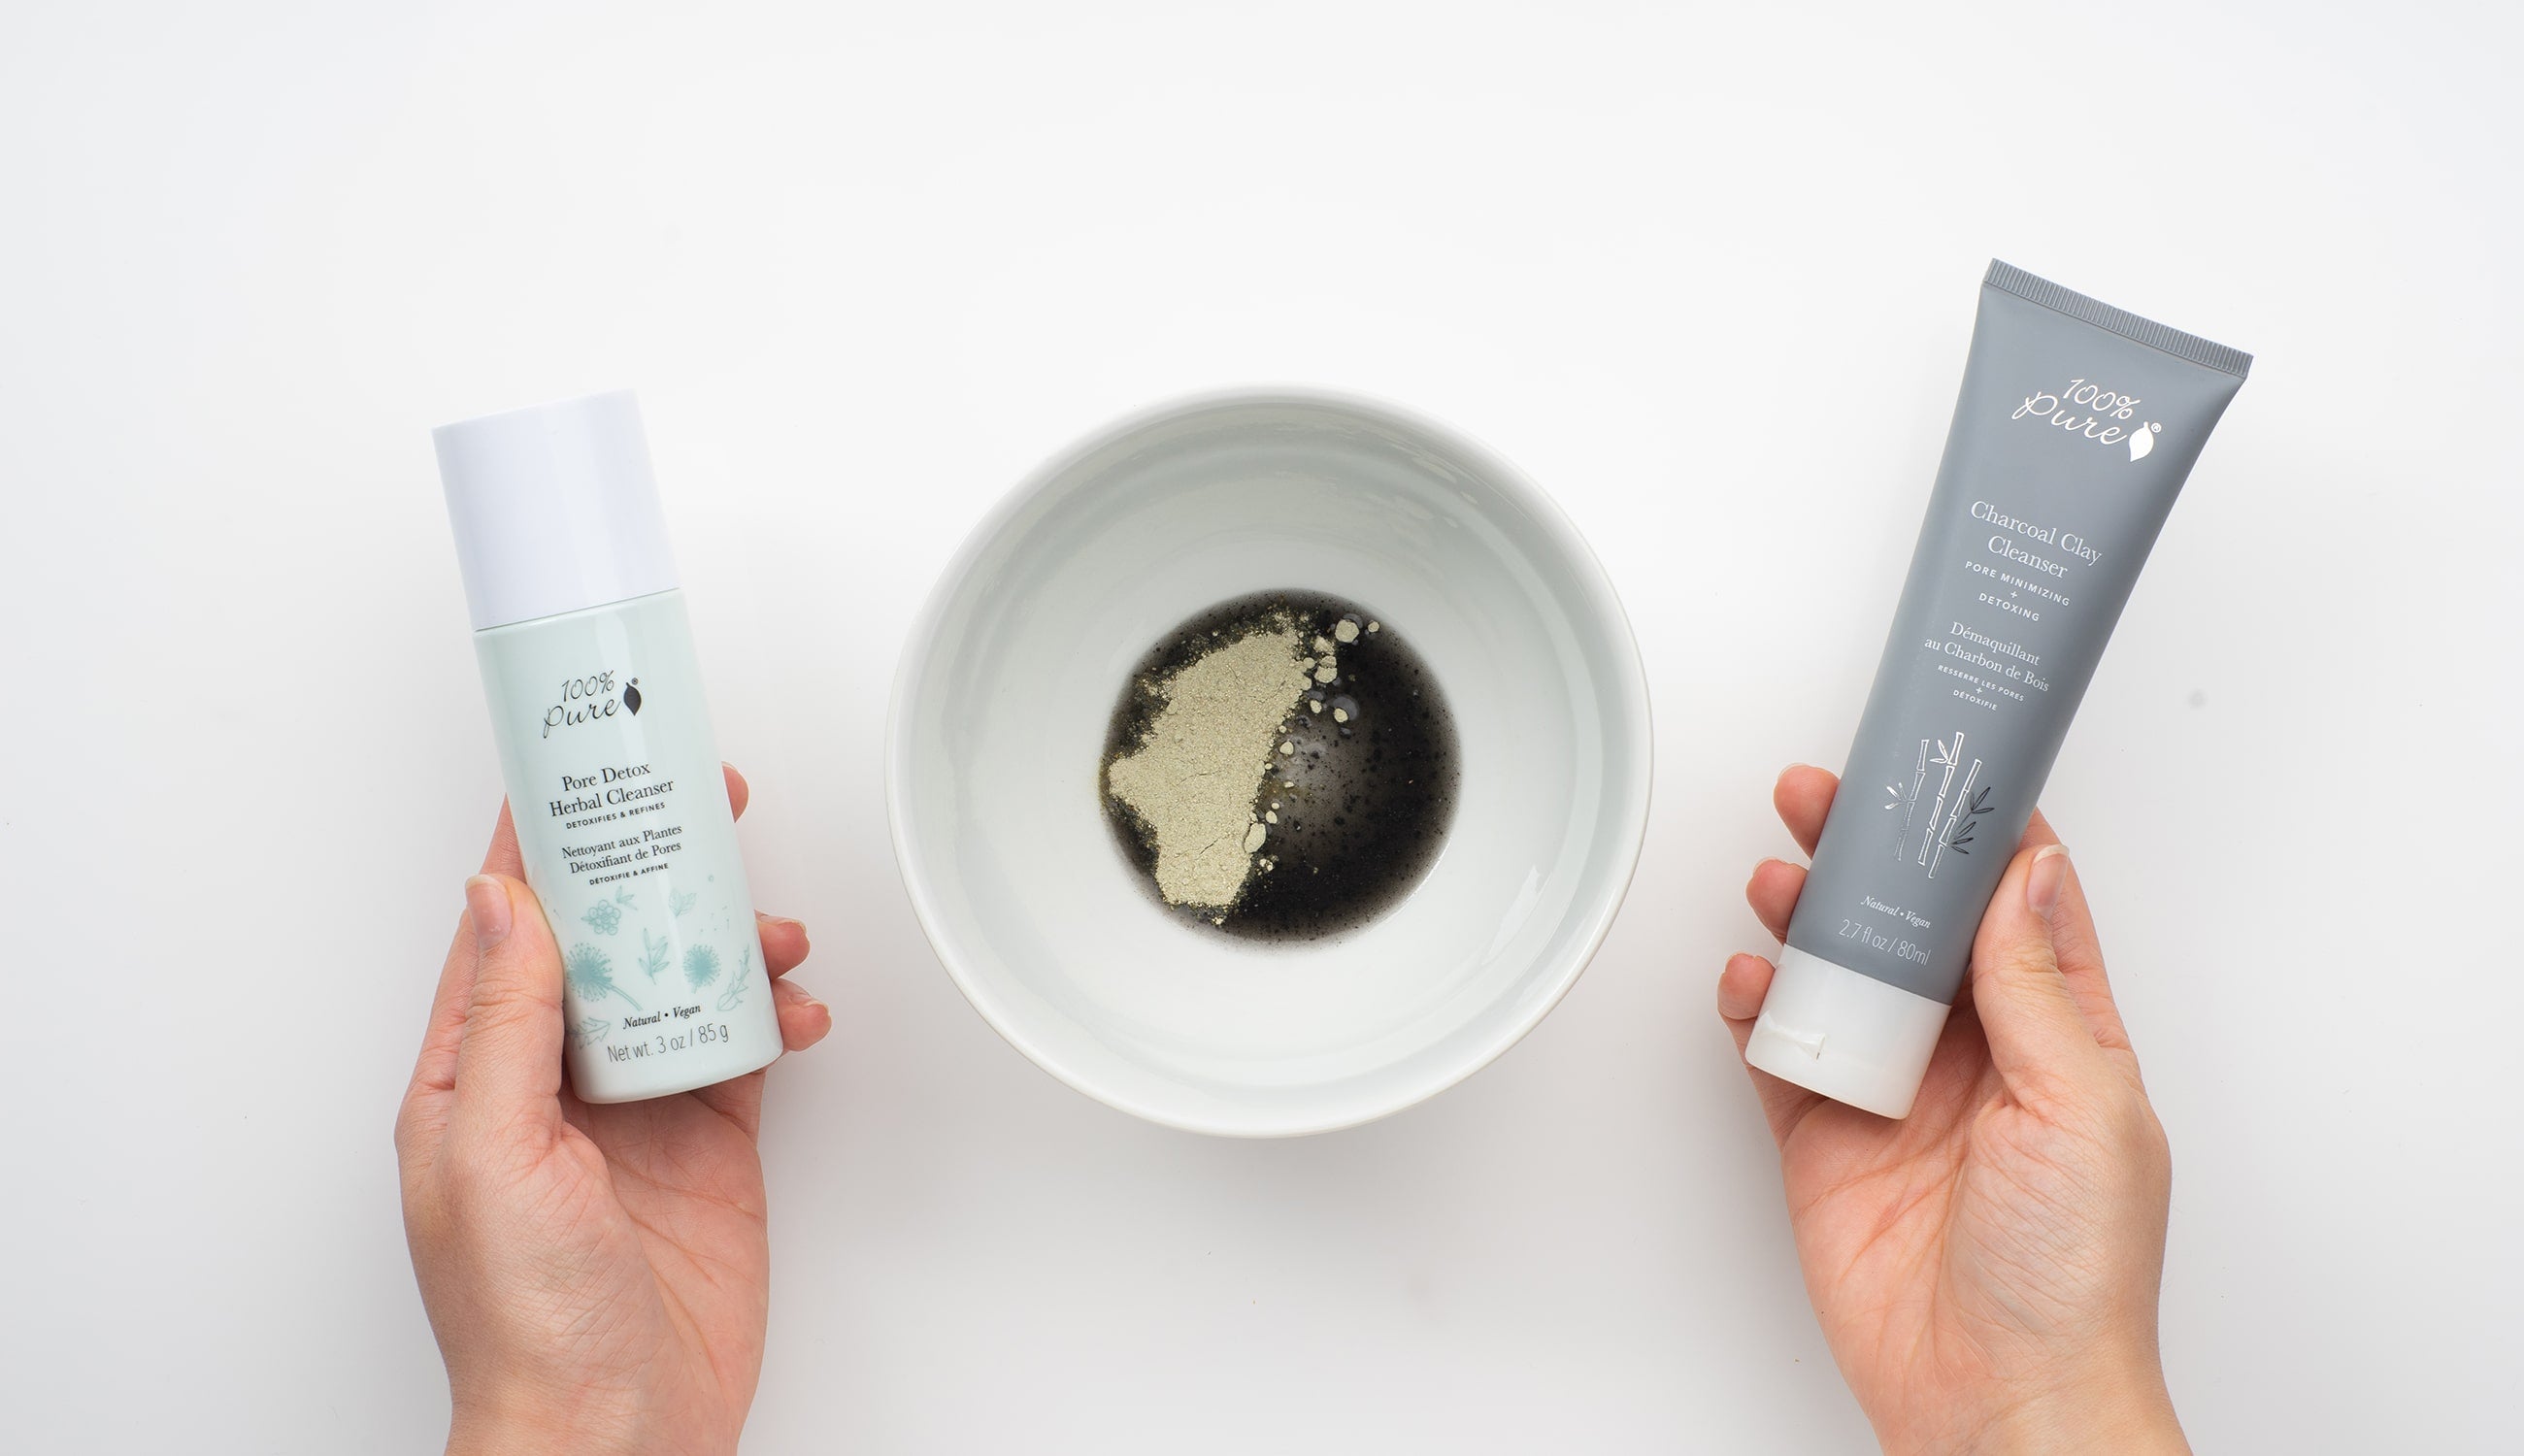 Pore Detox Mask and Charcoal Clay Cleanser